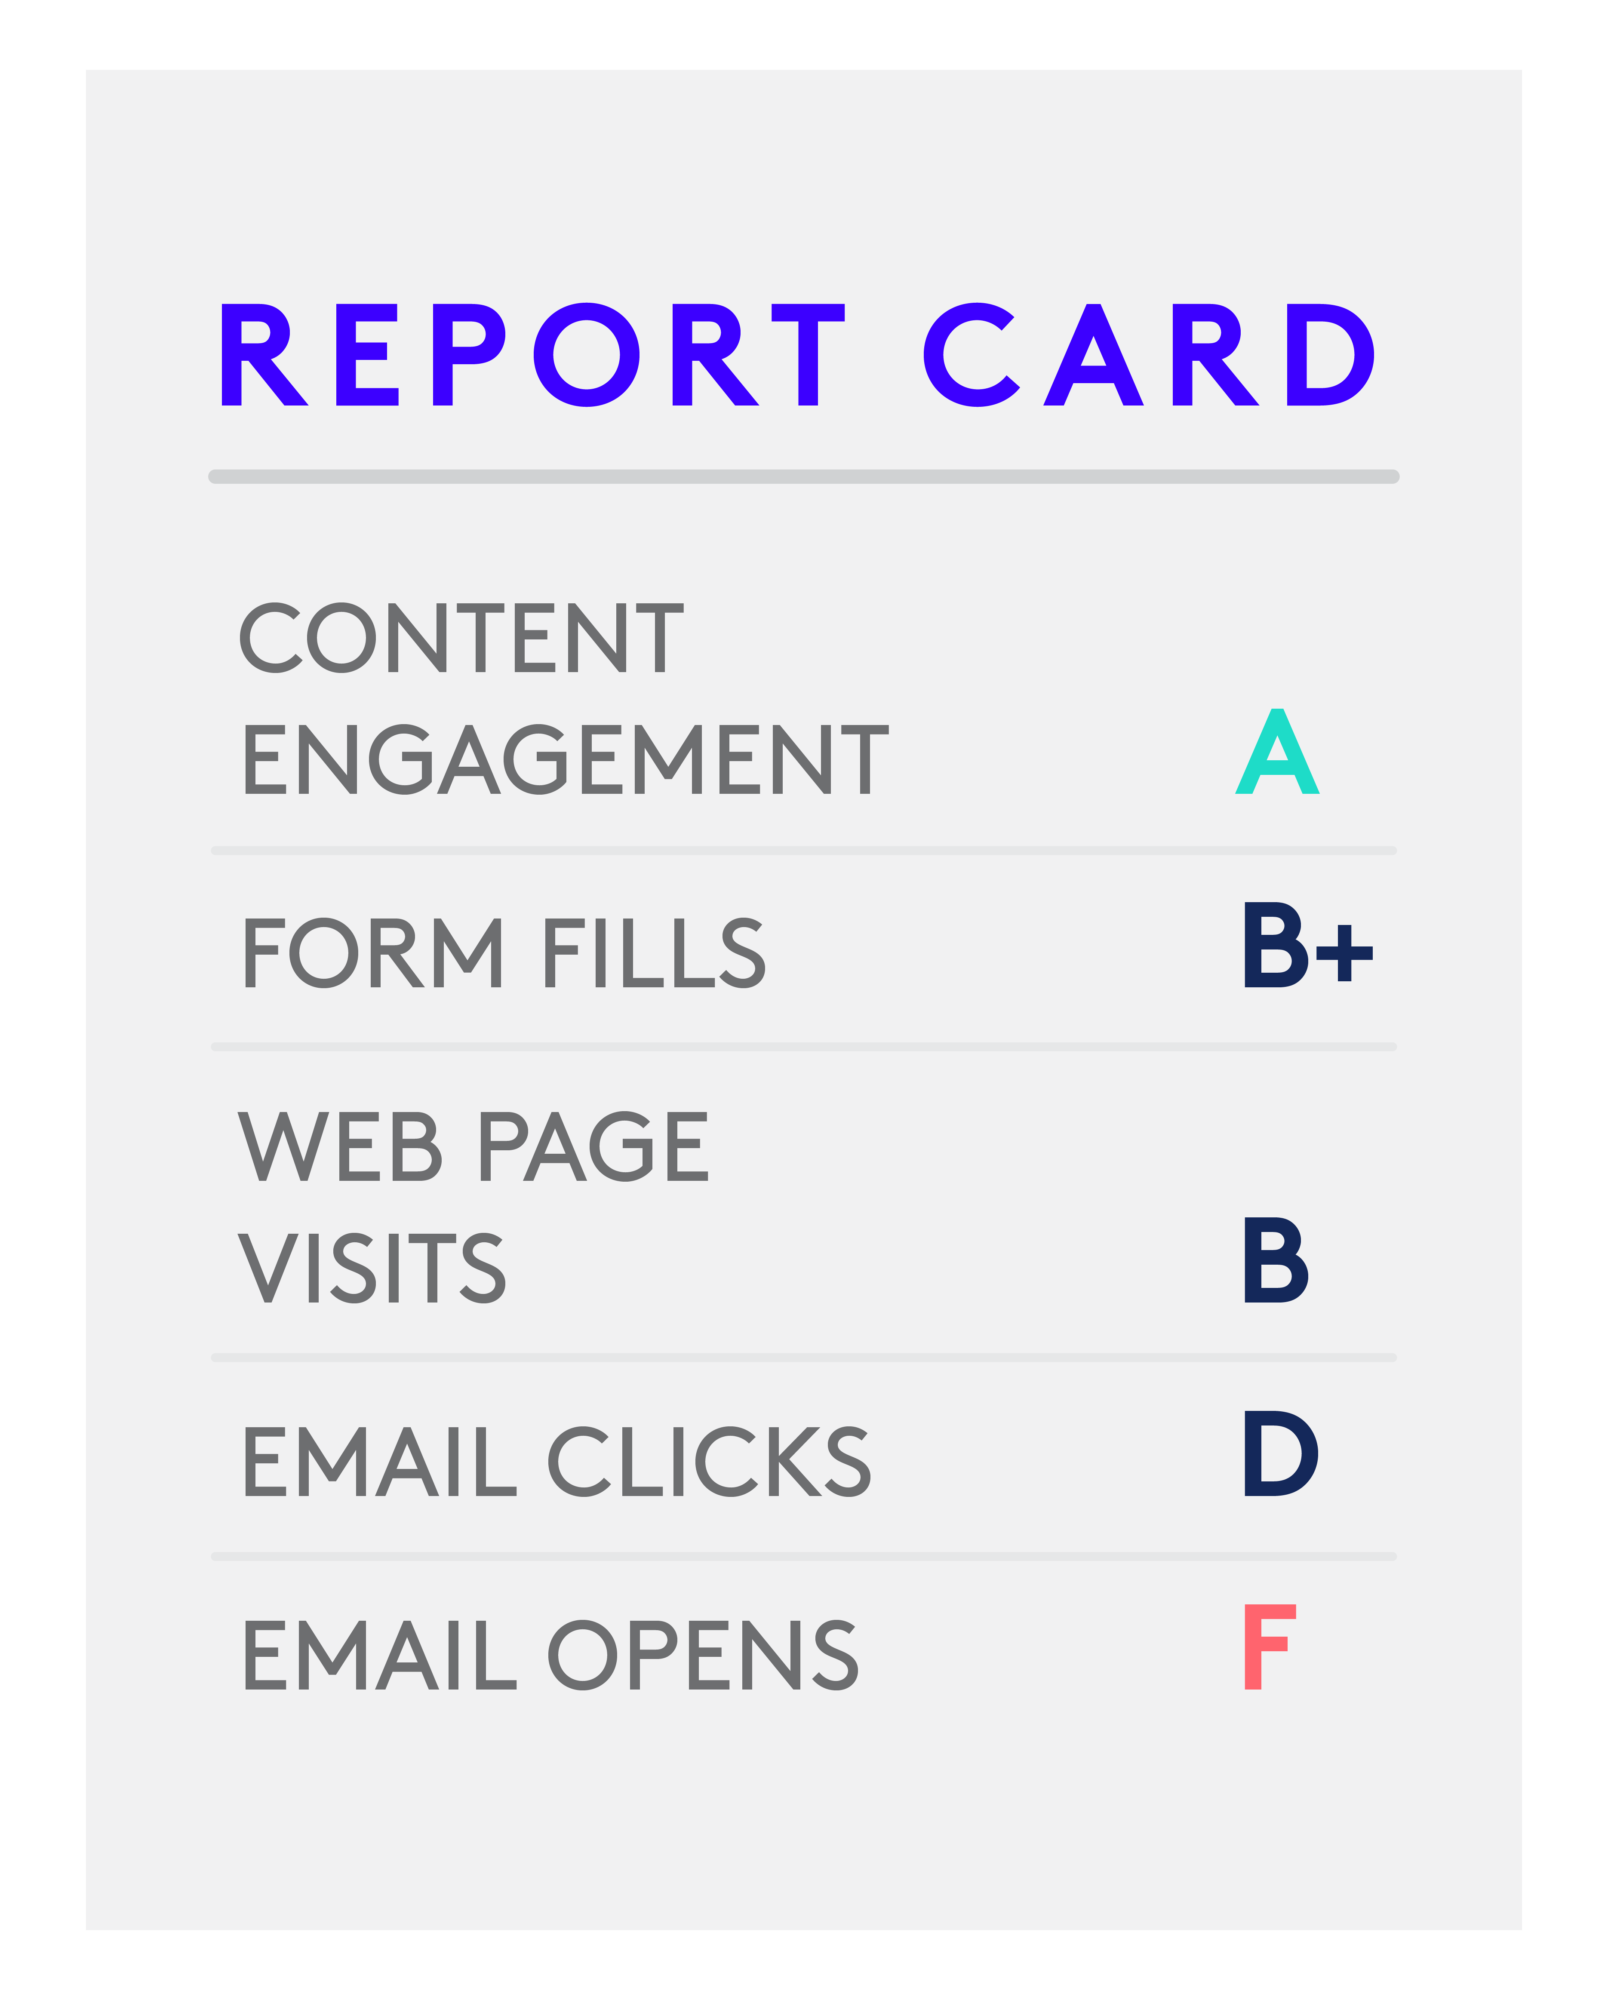 Report card on different engagement types: Content engagement = A. Form fills = B+. Web page visits = B. Email clicks = D. Email opens = F.